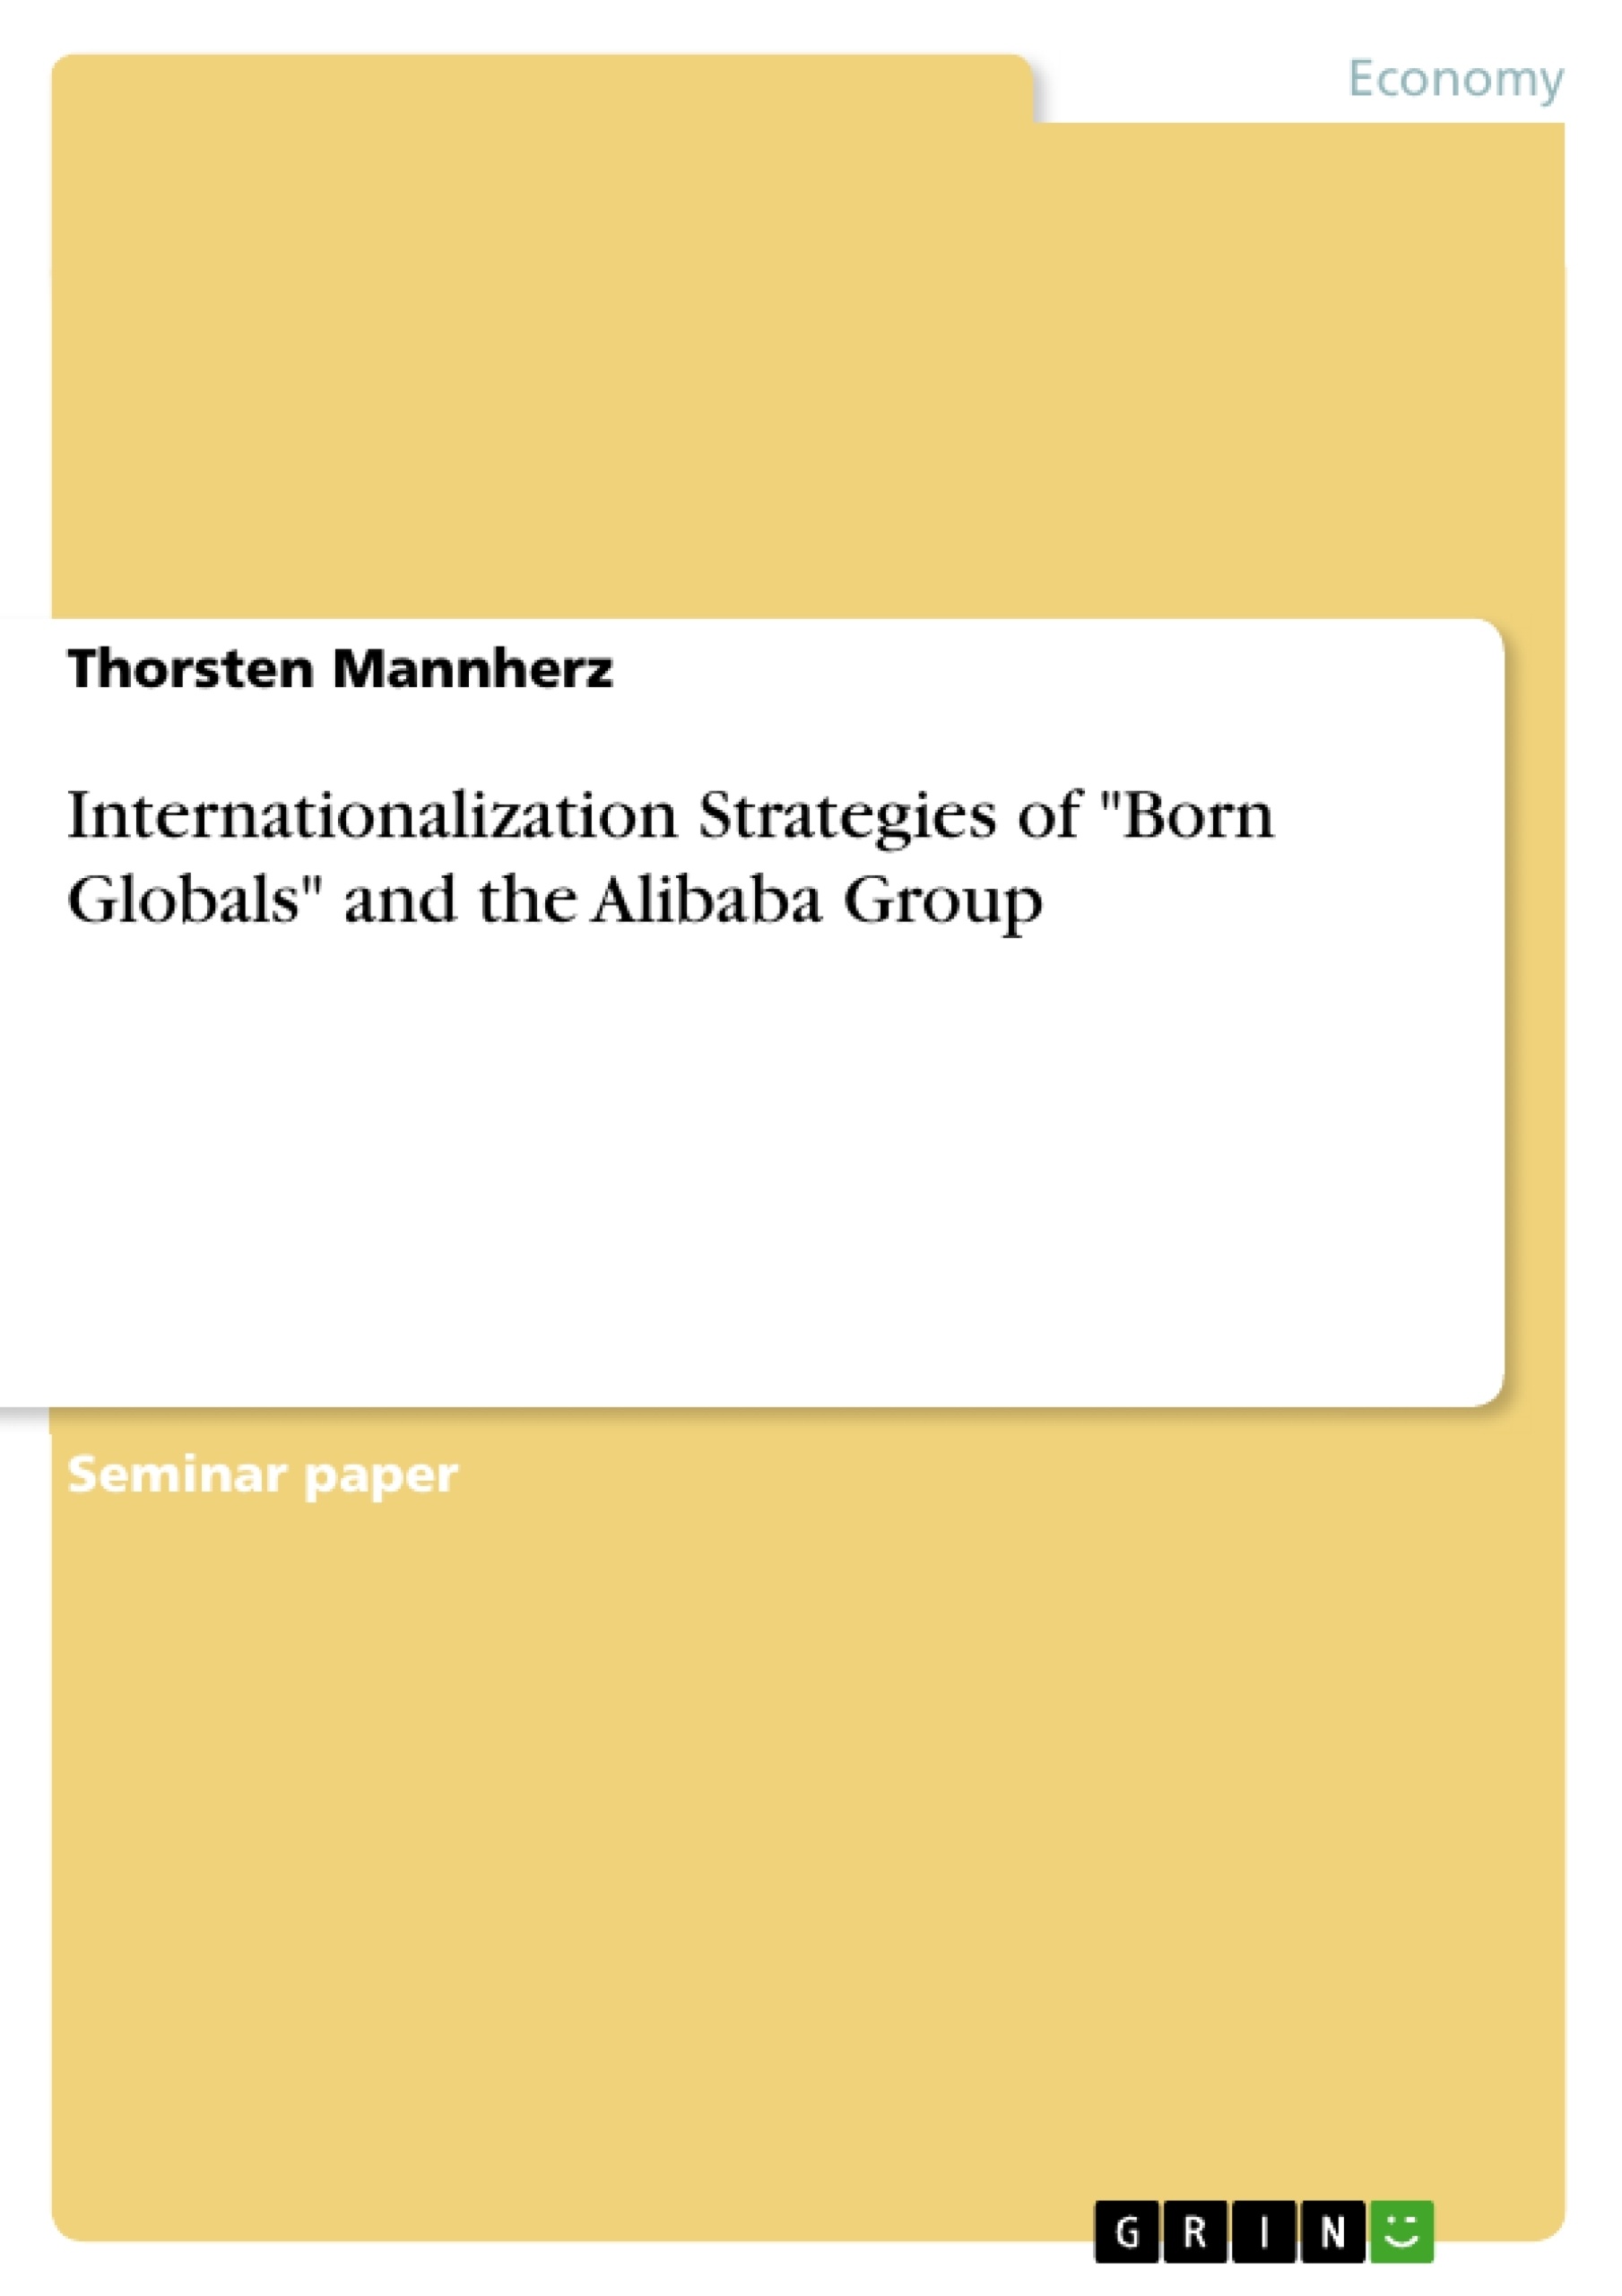 Title: Internationalization Strategies of "Born Globals" and the Alibaba Group